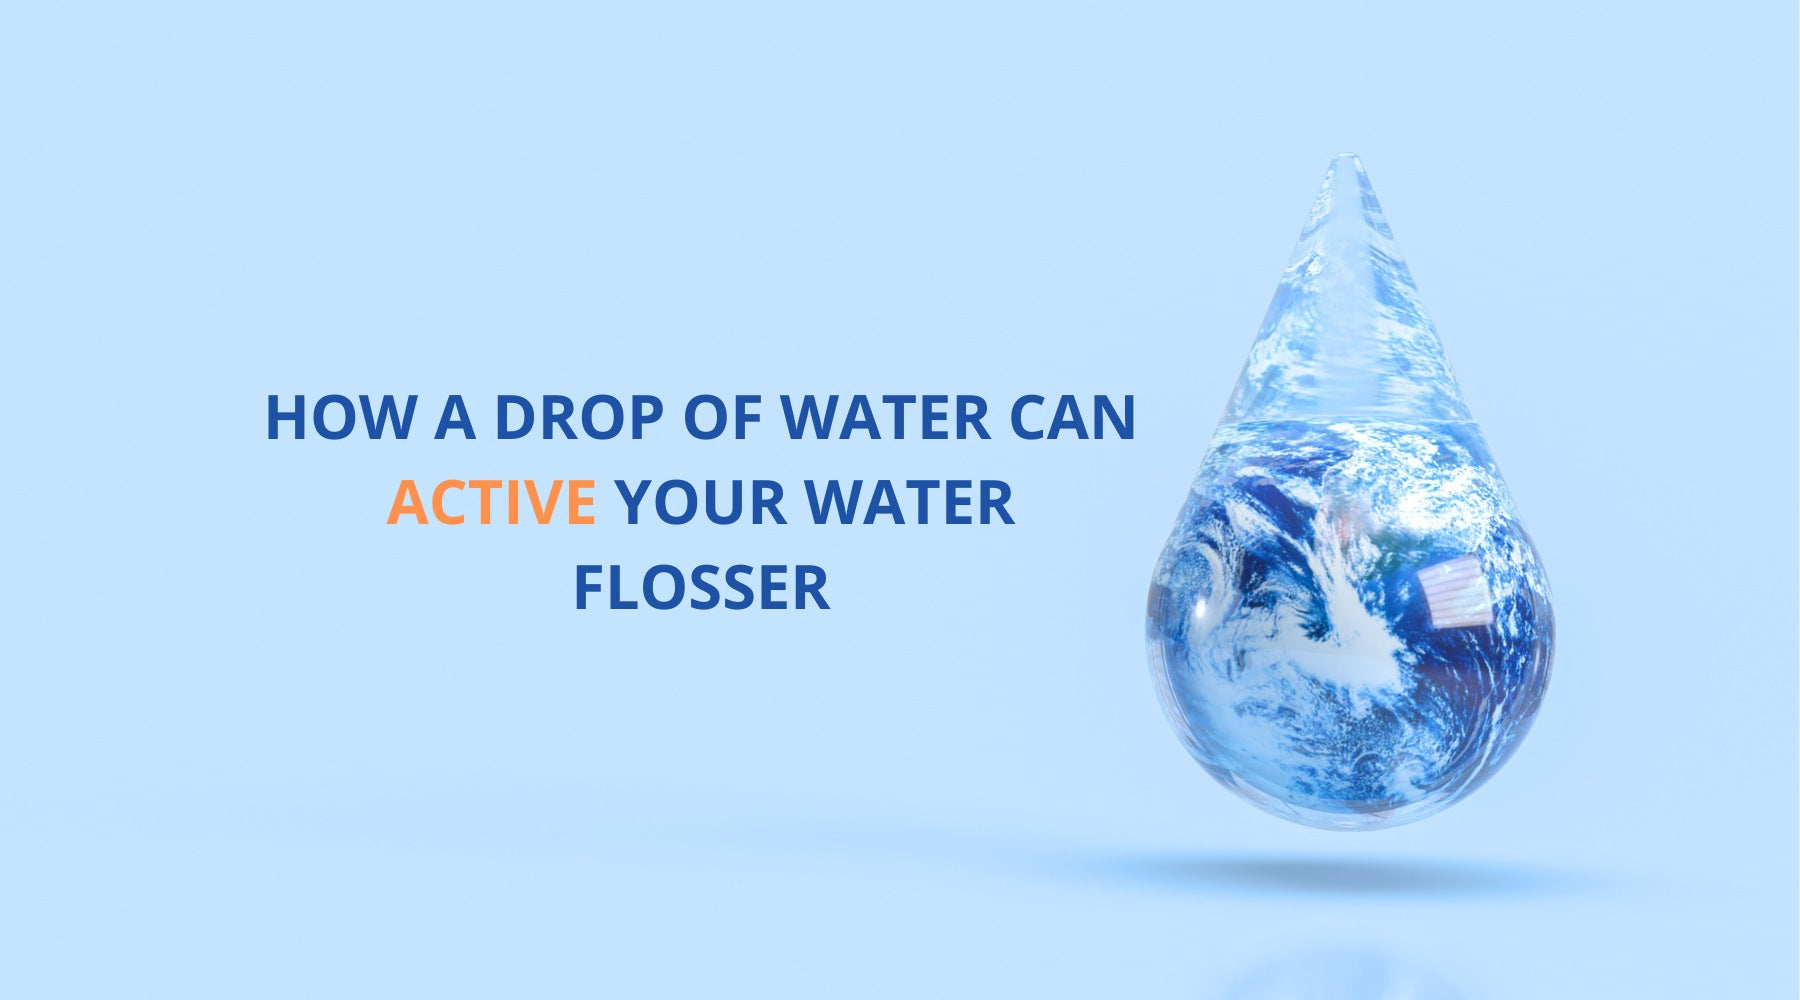 One drop of water save your water flosser